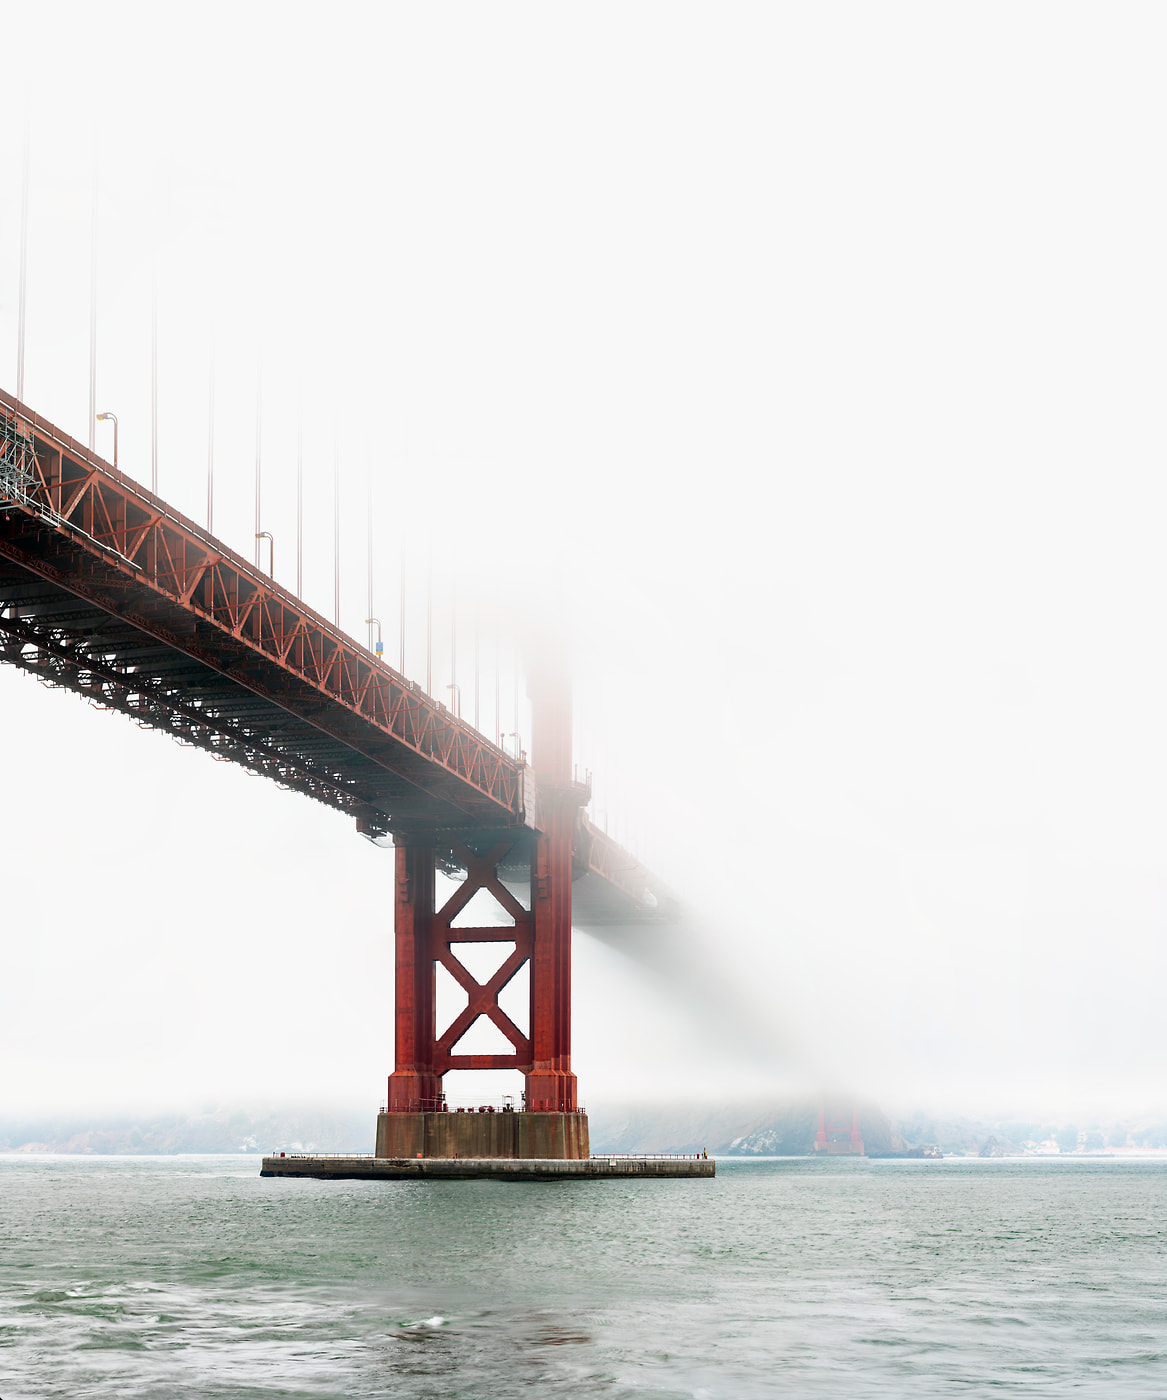 173 megapixels! A very high resolution, large-format VAST photo print of the Golden Gate Bridge in the fog; photograph created by Justin Katz in Fort Point, Golden Gate Recreation Area, San Francisco, California.